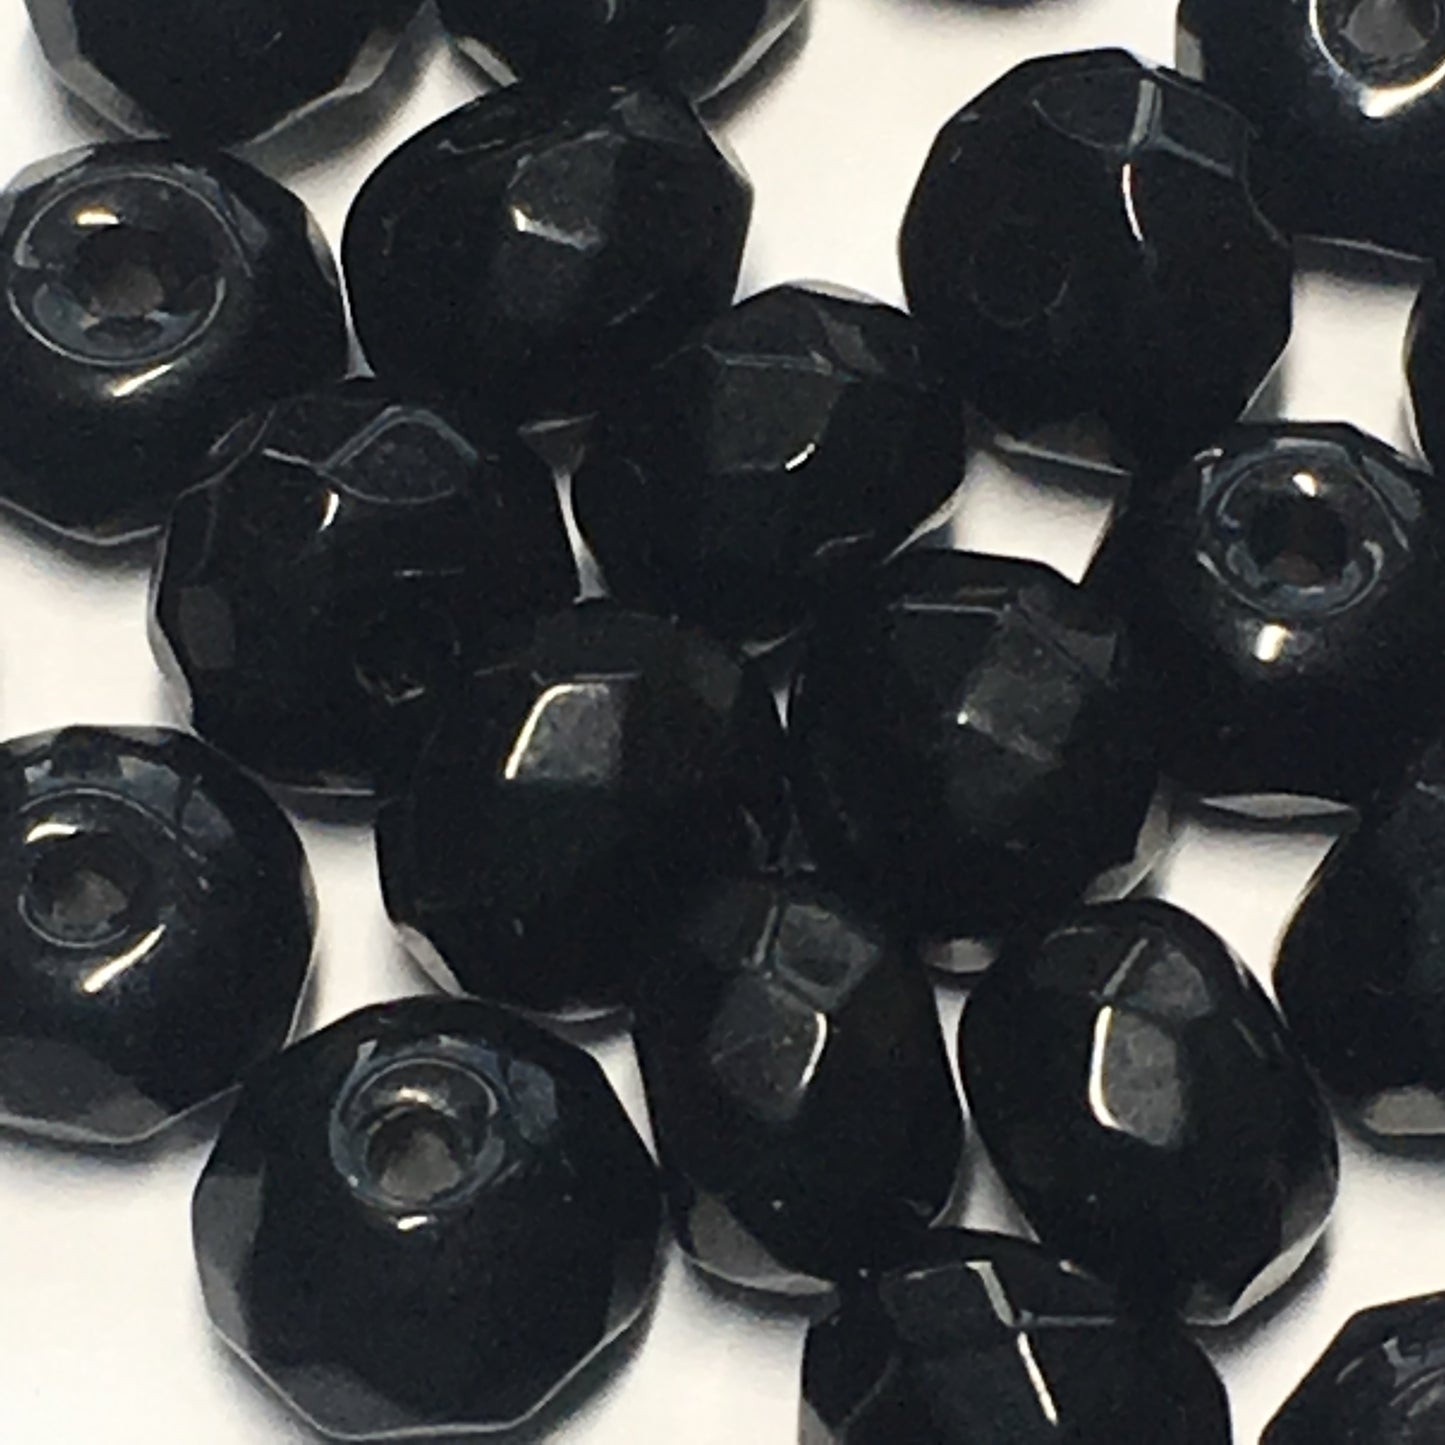 Opaque Black Faceted Rondelle Glass Beads, 4 x 6 mm, 30 Beads